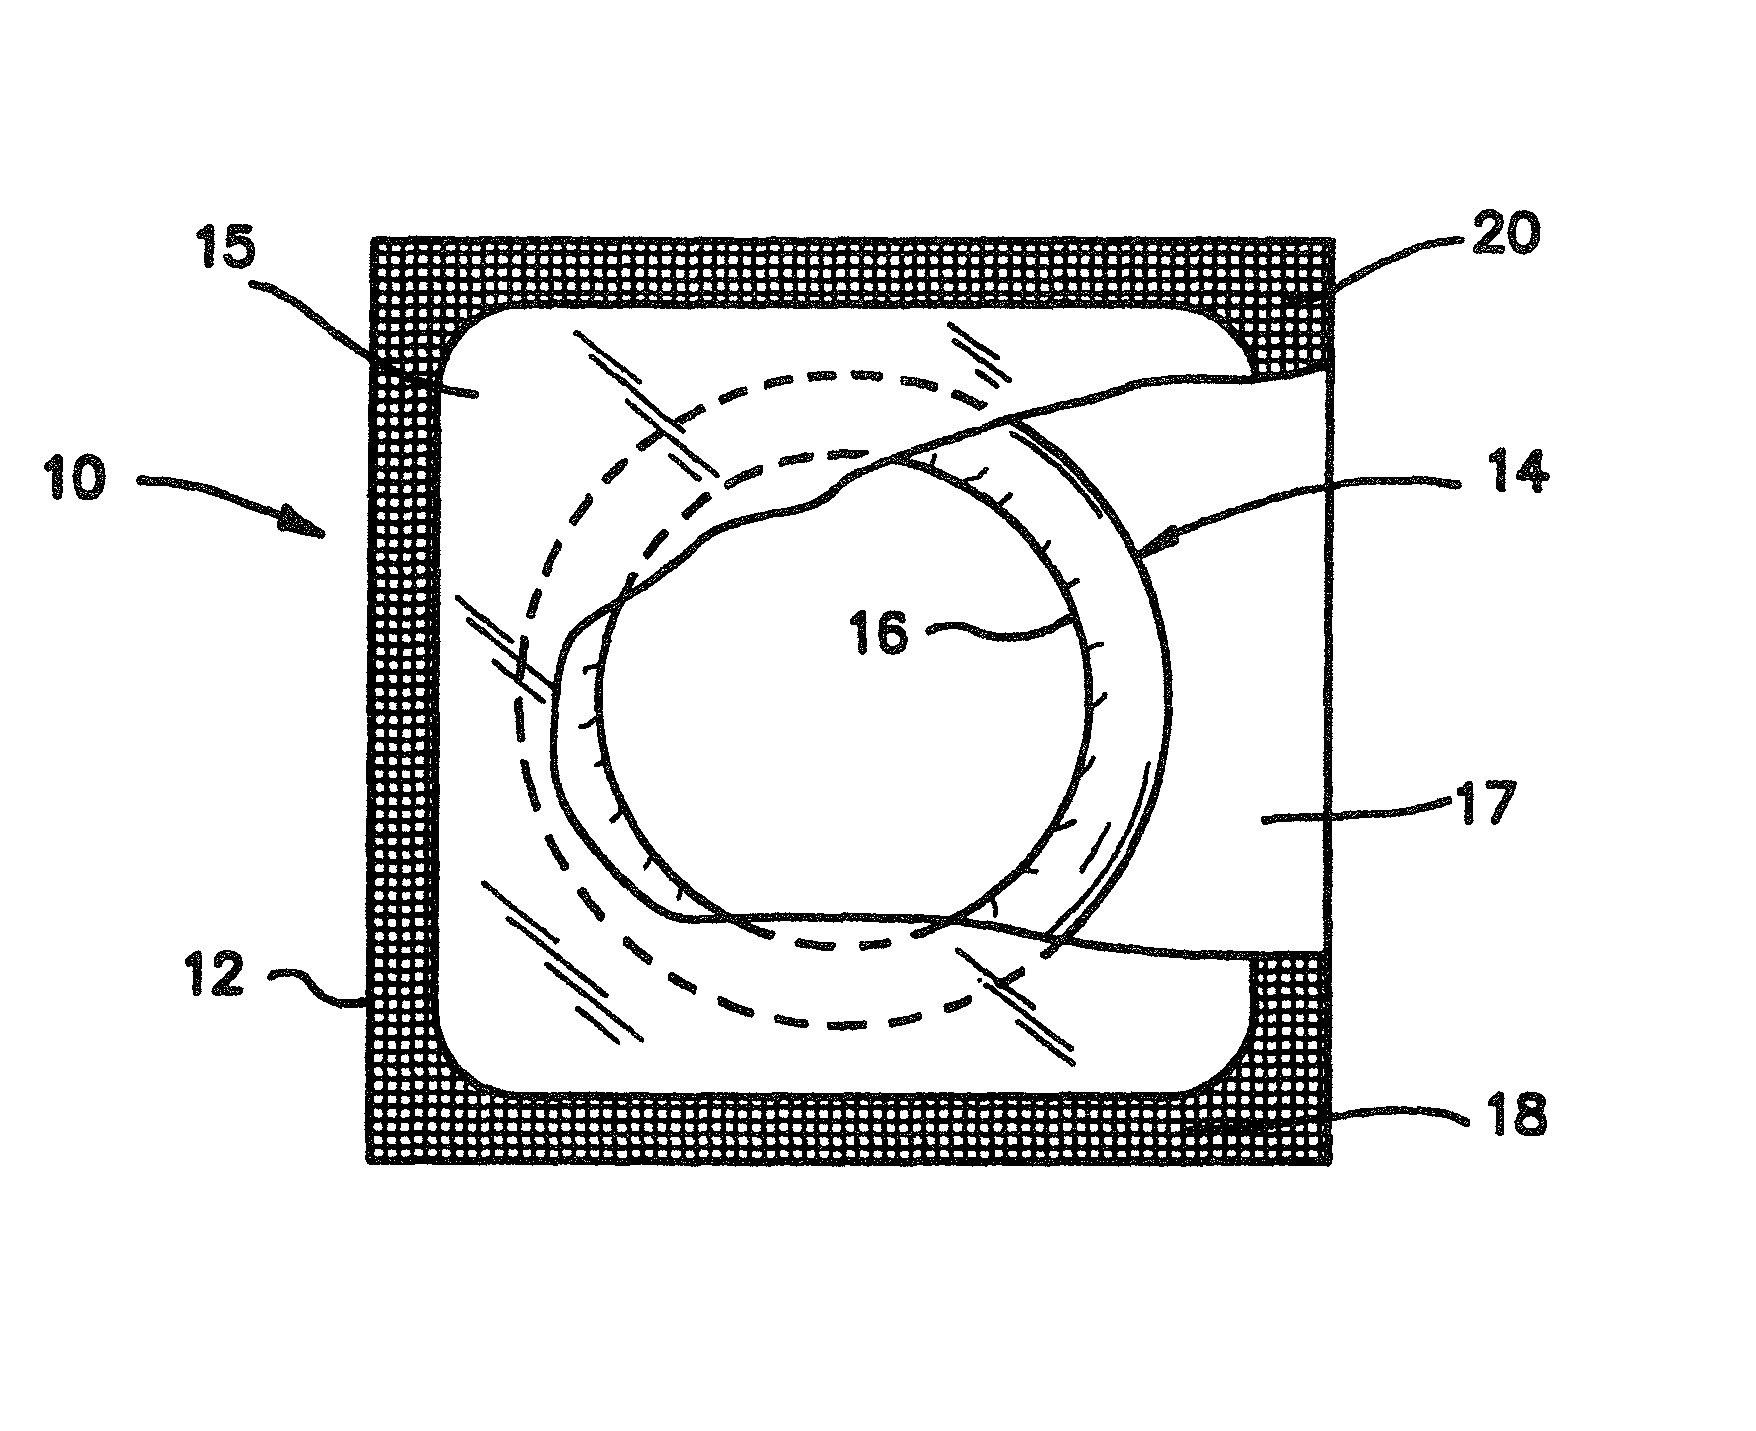 Clear, washable lubricant compositions and methods of making same